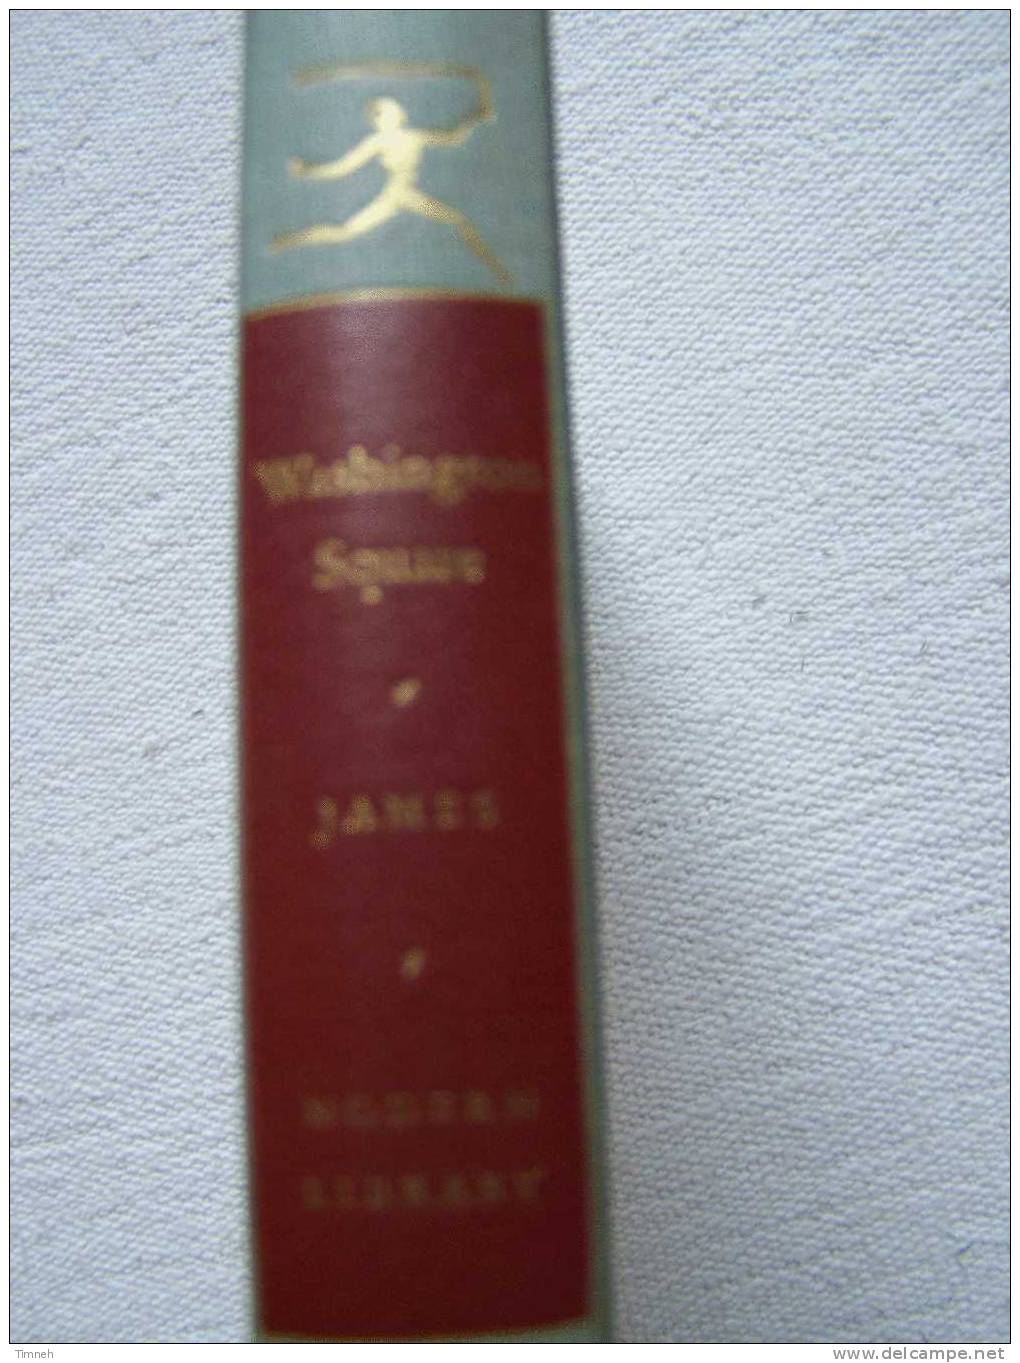 HENRY JAMES-Washington Square-the Modern Library-introduction Clifton Fadiman - Family/ Relationships